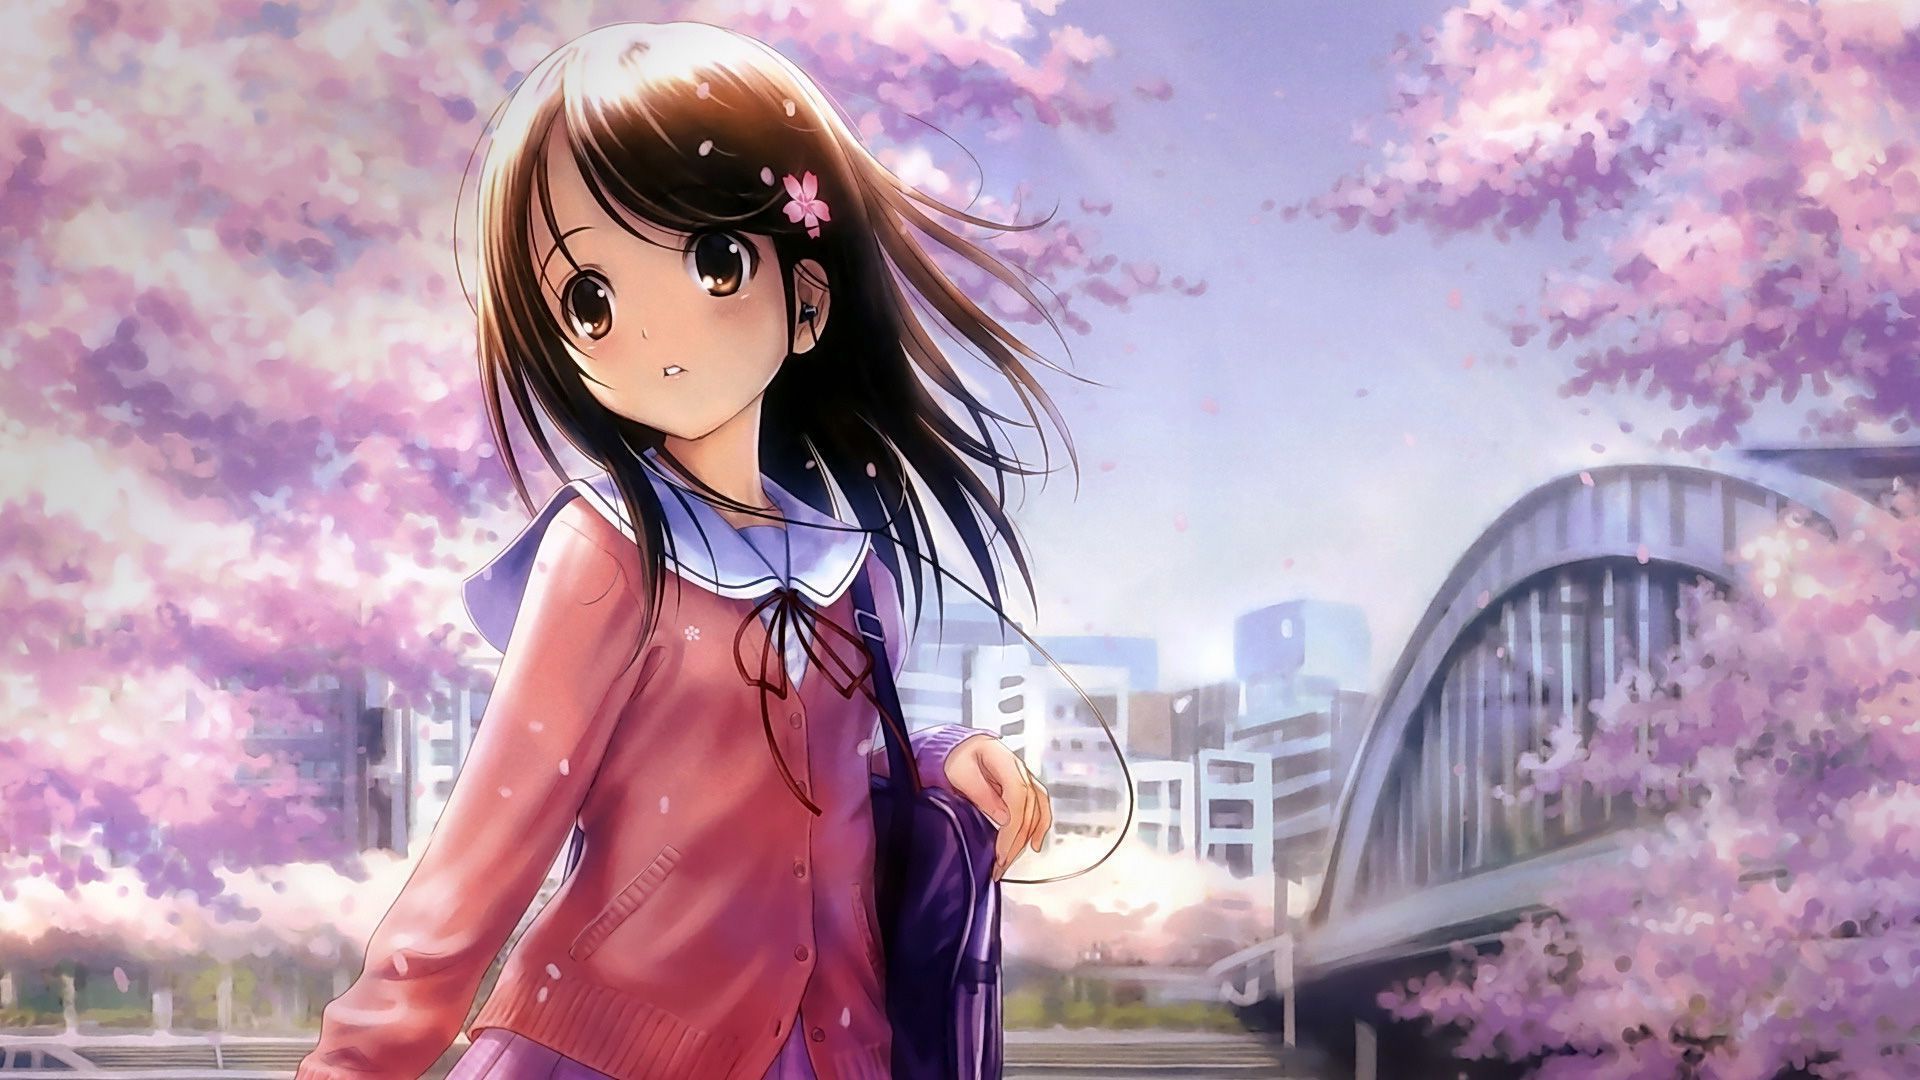 Anime Background Wallpaper Image Picture Design. Cute anime